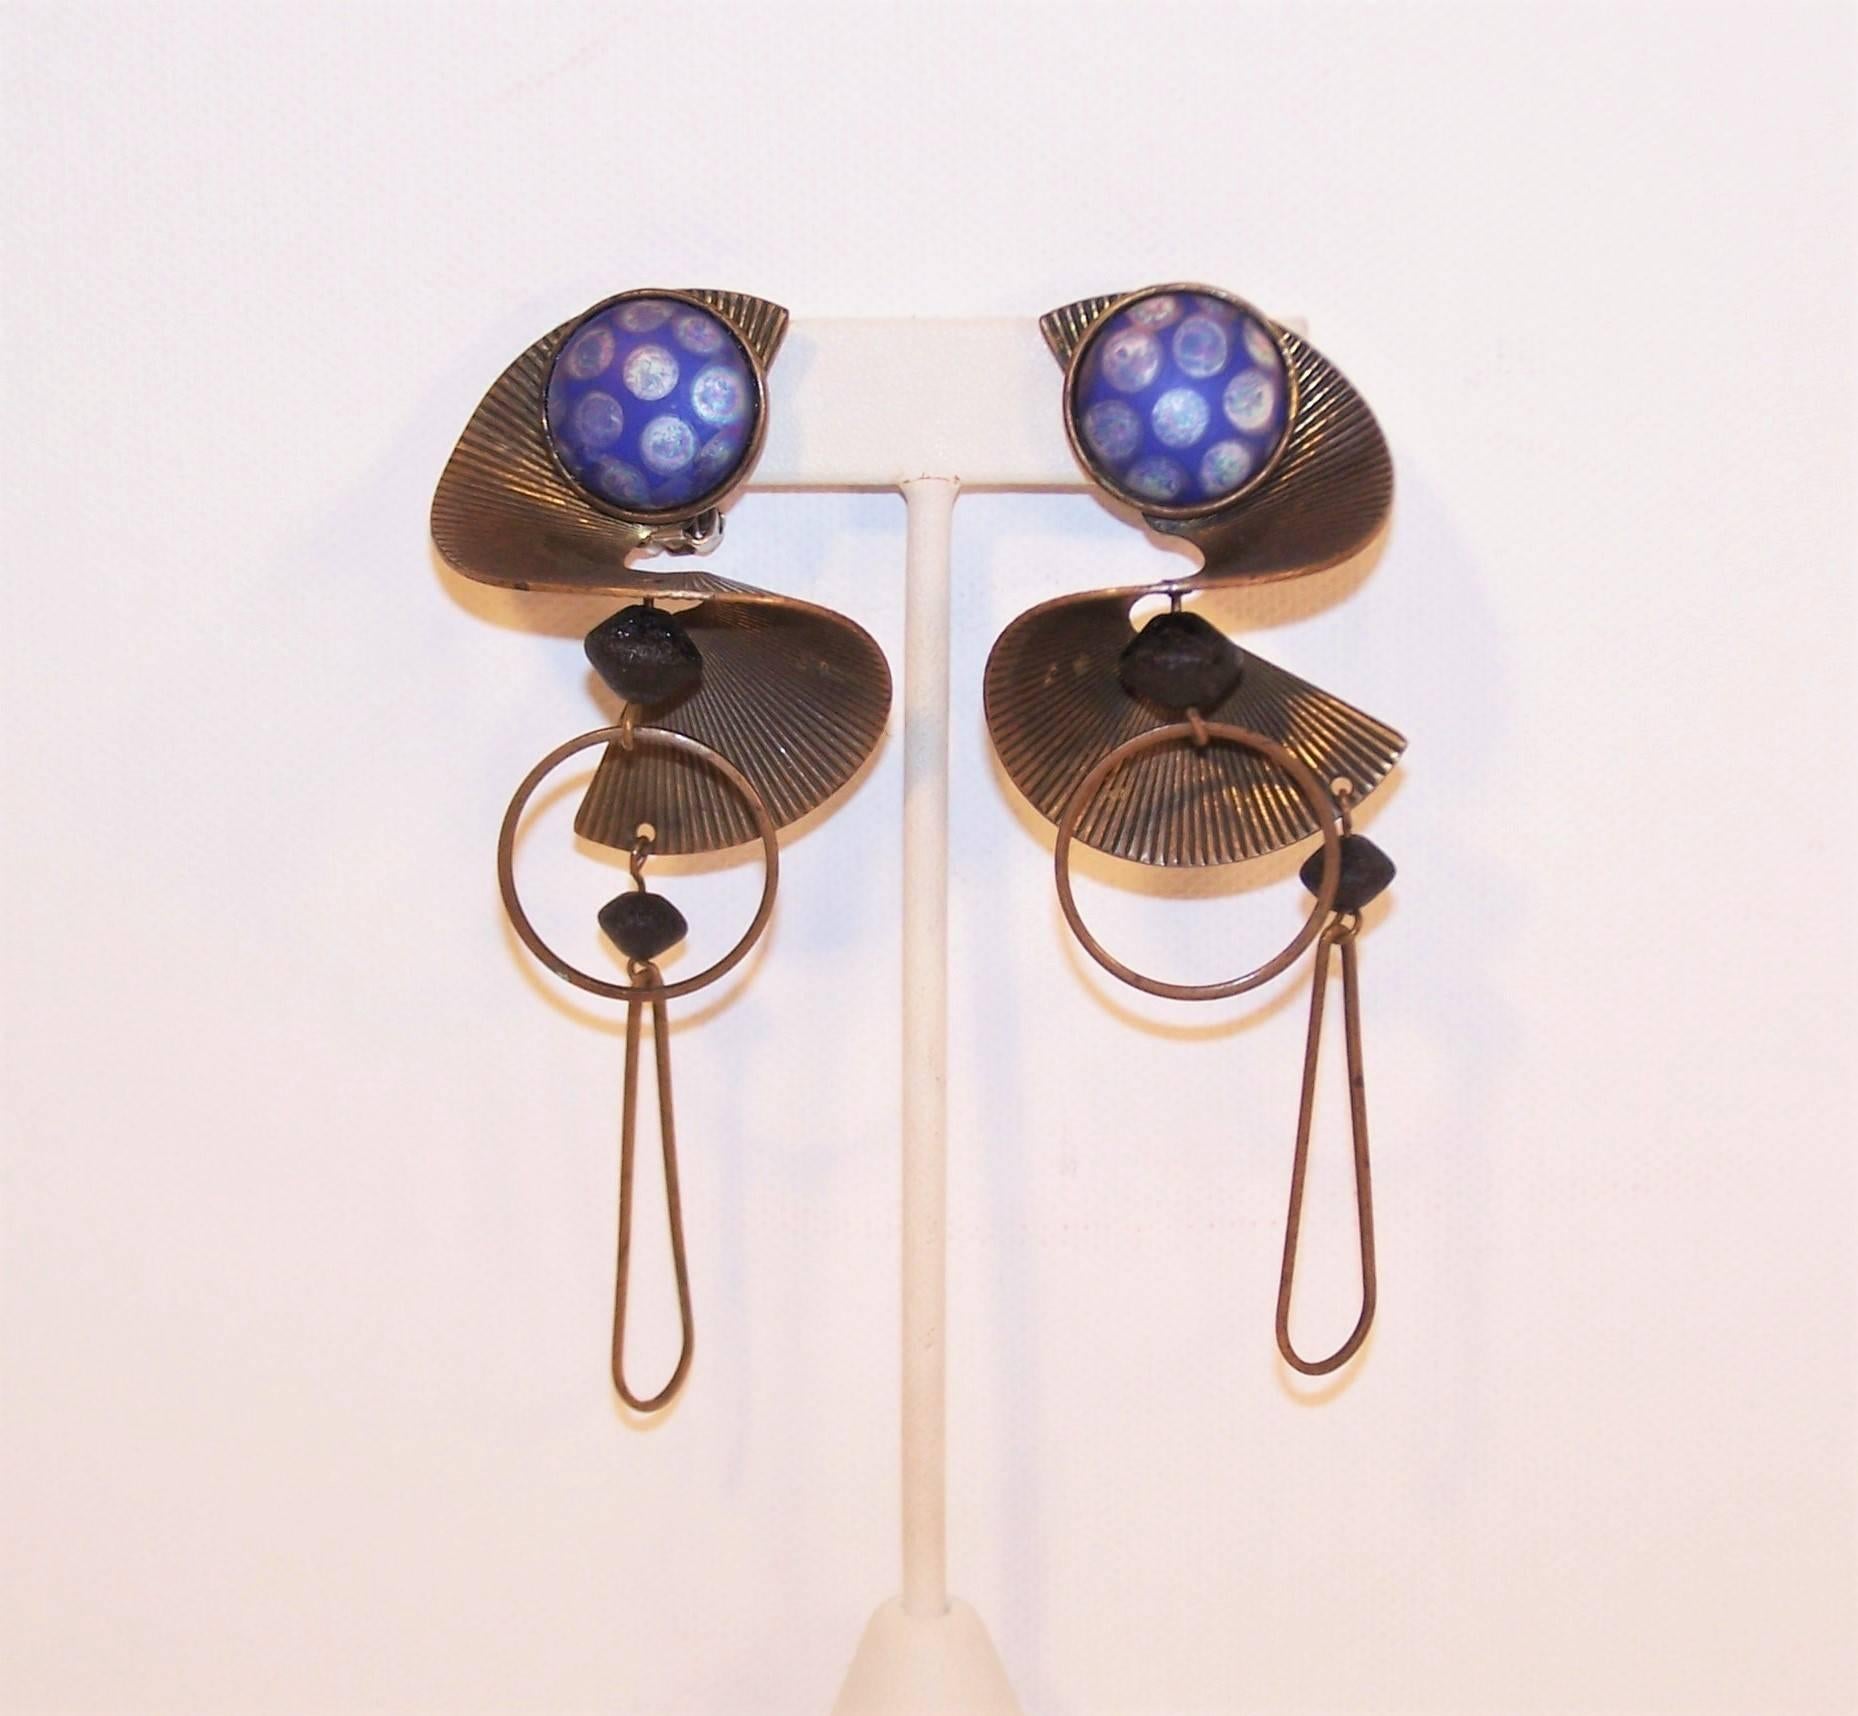 The stars and planets unite in these vintage artisan made earrings that conjure up celestial imagery utilizing blue art glass, copper and volcanic style black ceramic beads.  The clip on base is a swirled striated copper which suspends two